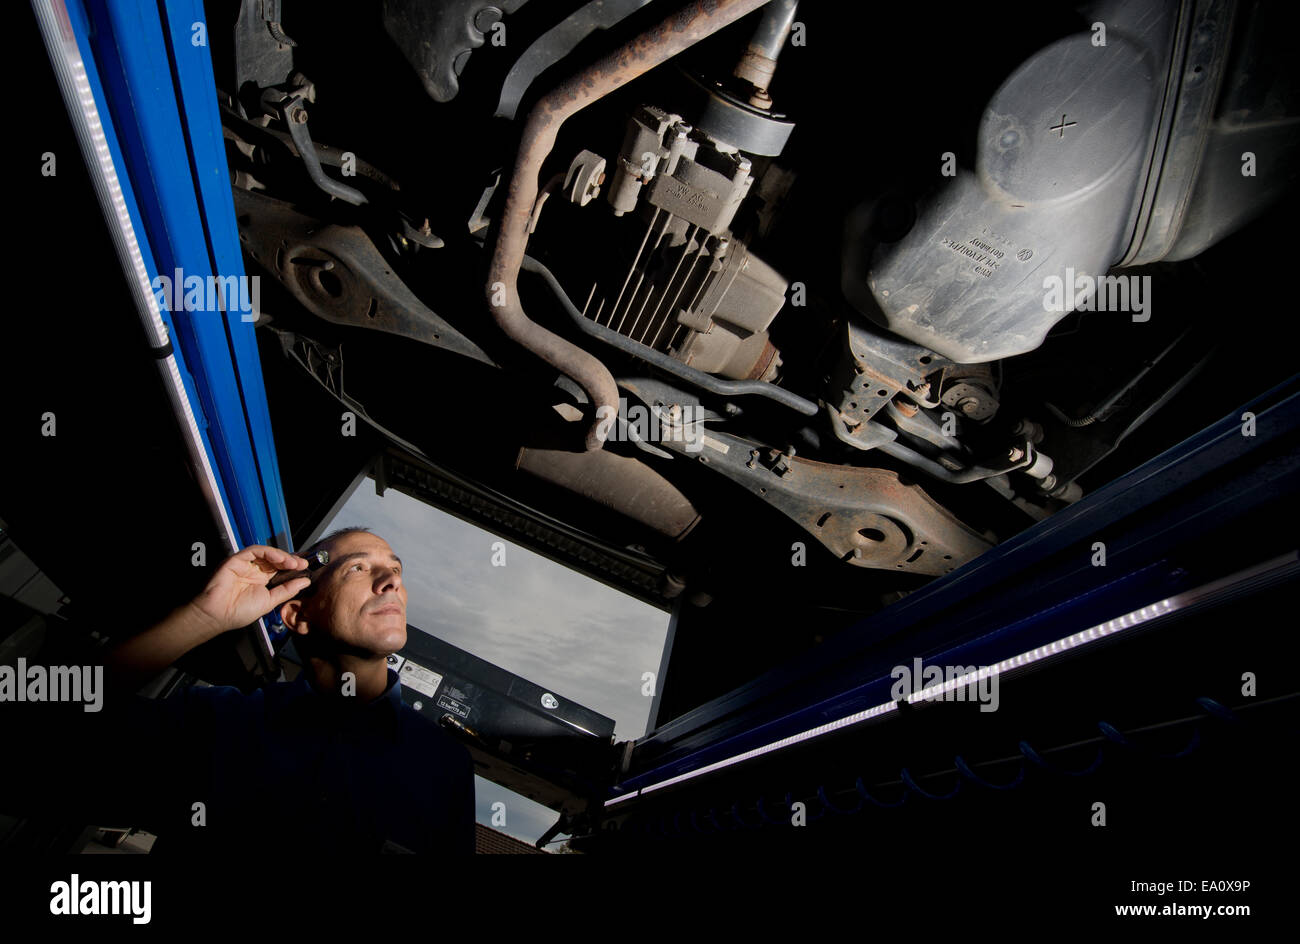 Hildesheim, Germany. 5th Nov, 2014. Technical inspector of TUV Nord, technical inspection association, Geert Dannhauer, examines a Volkswagen Tiguan car at the TUV Nord testing and service station in Hildesheim, Germany, 5 November 2014. Photo: Juian Stratenschulte/dpa/Alamy Live News Stock Photo